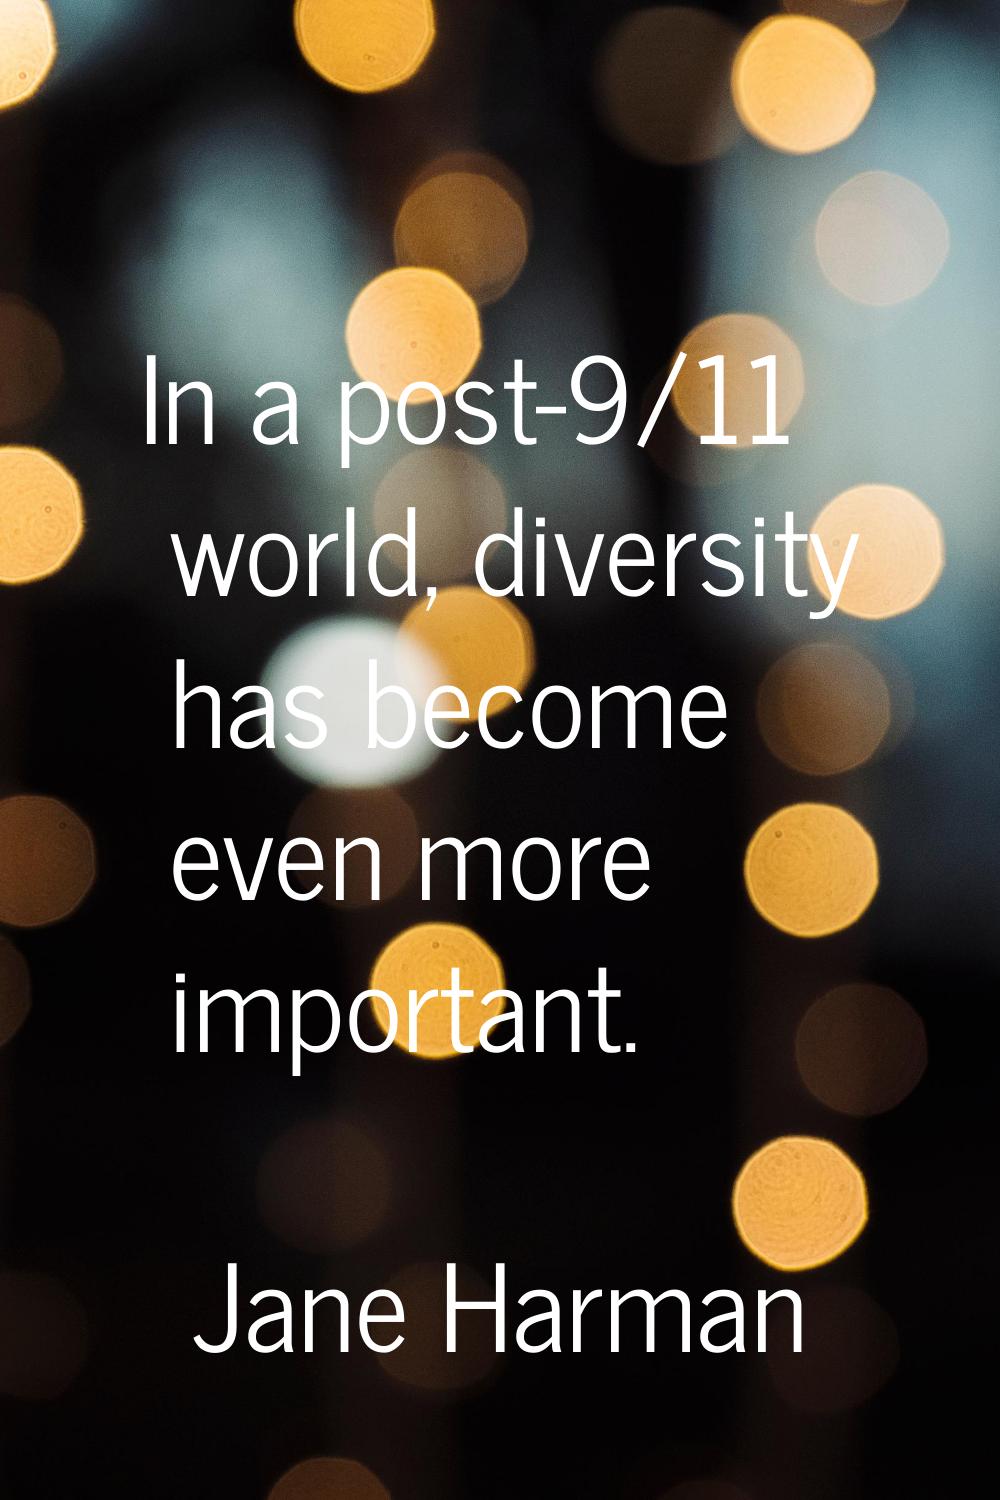 In a post-9/11 world, diversity has become even more important.